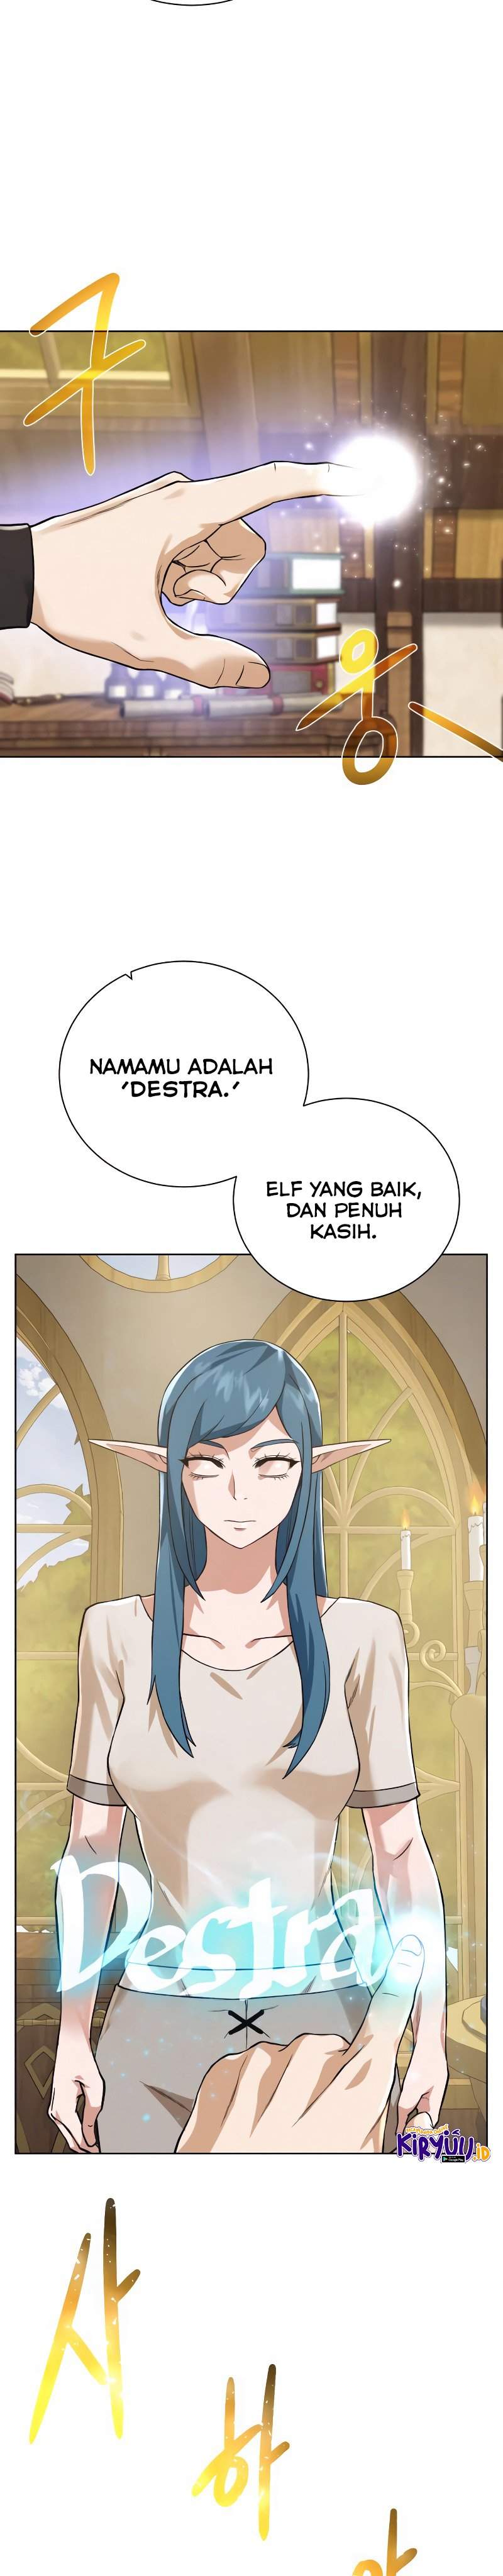 Dungeons &amp; Artifacts Chapter 54